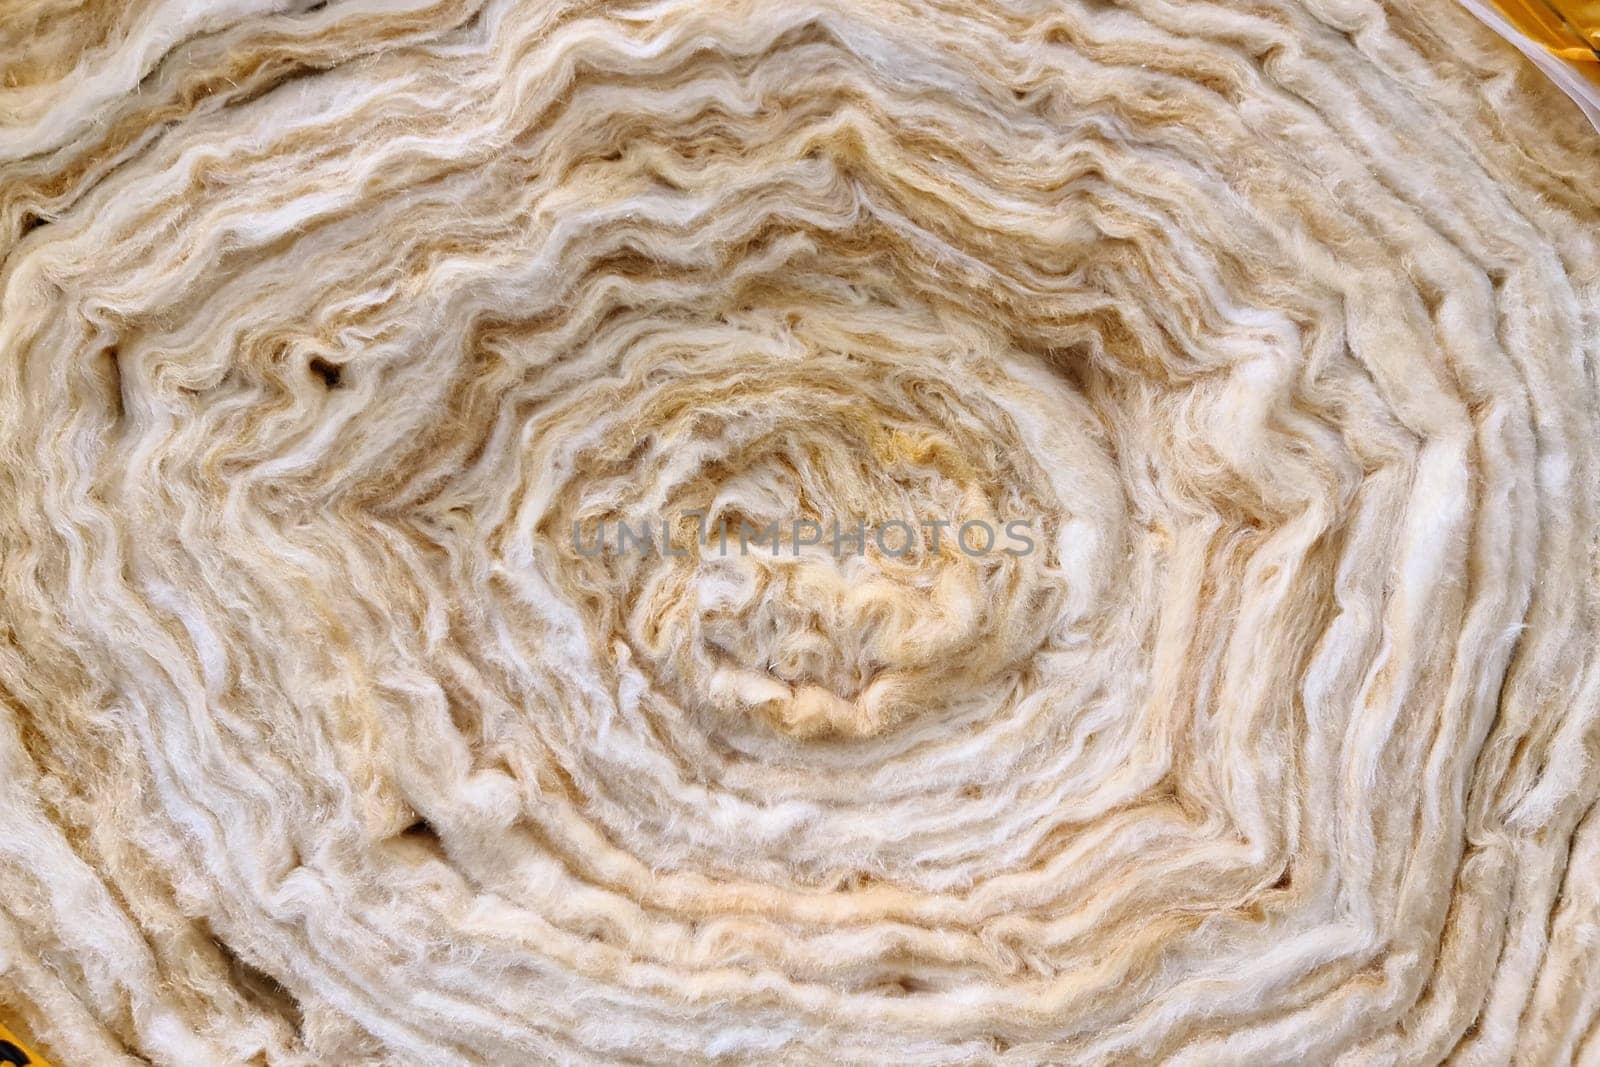 A roll of new twisted glass wool, a soft material for insulating walls and other structures, close-up, background.